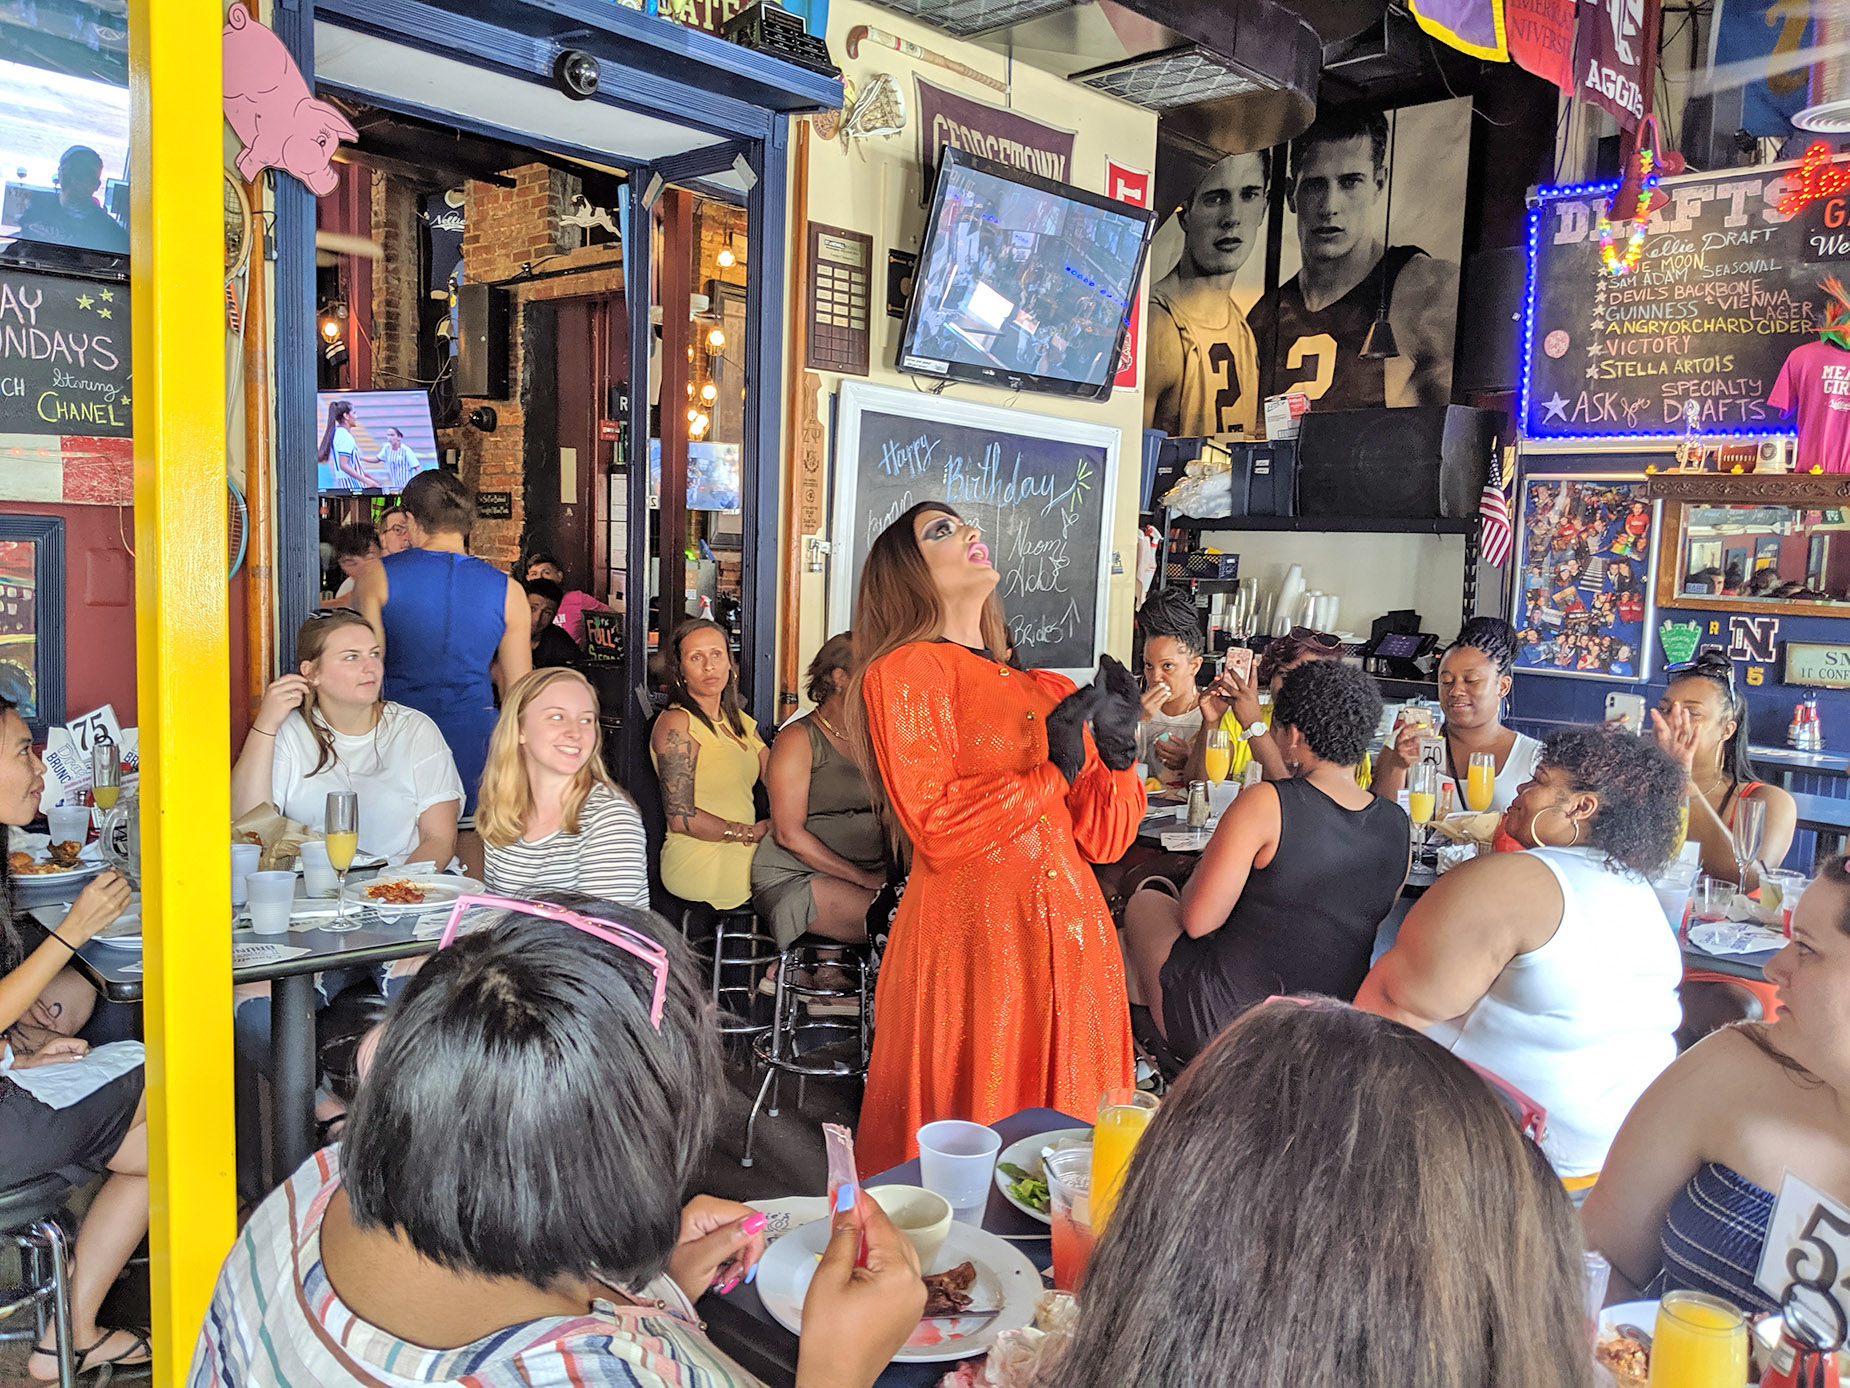 Alexa Shontelle with a reveal on at Chanellie's Drag Brunch.